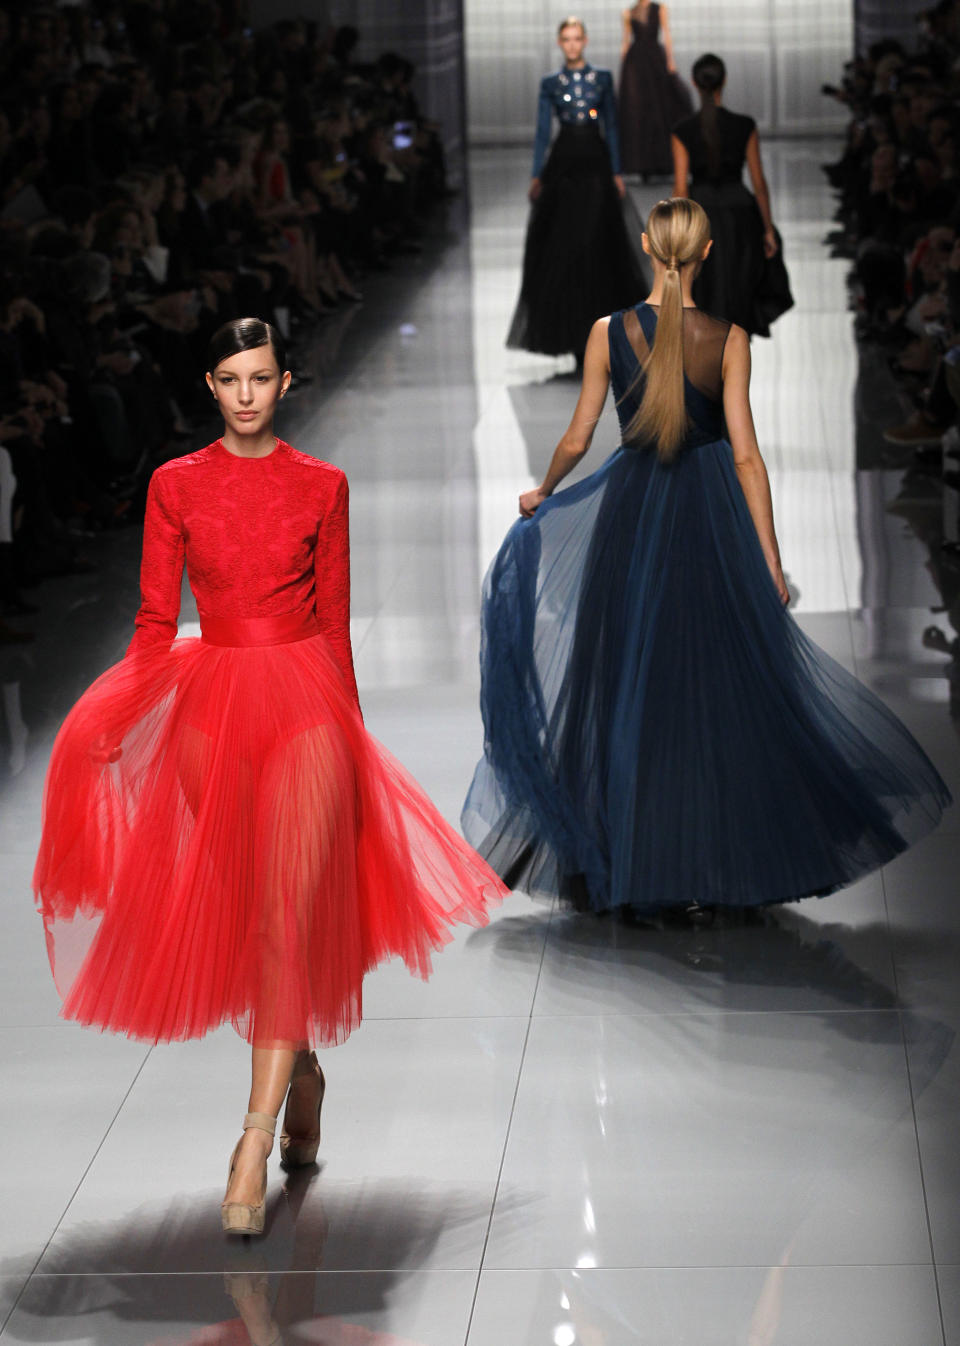 Models wear creations from designer Christian Dior as part of the Fall-Winter, ready-to-wear 2013 fashion collection, during Paris Fashion week, Friday, March 2, 2012. (AP Photo/Christophe Ena)